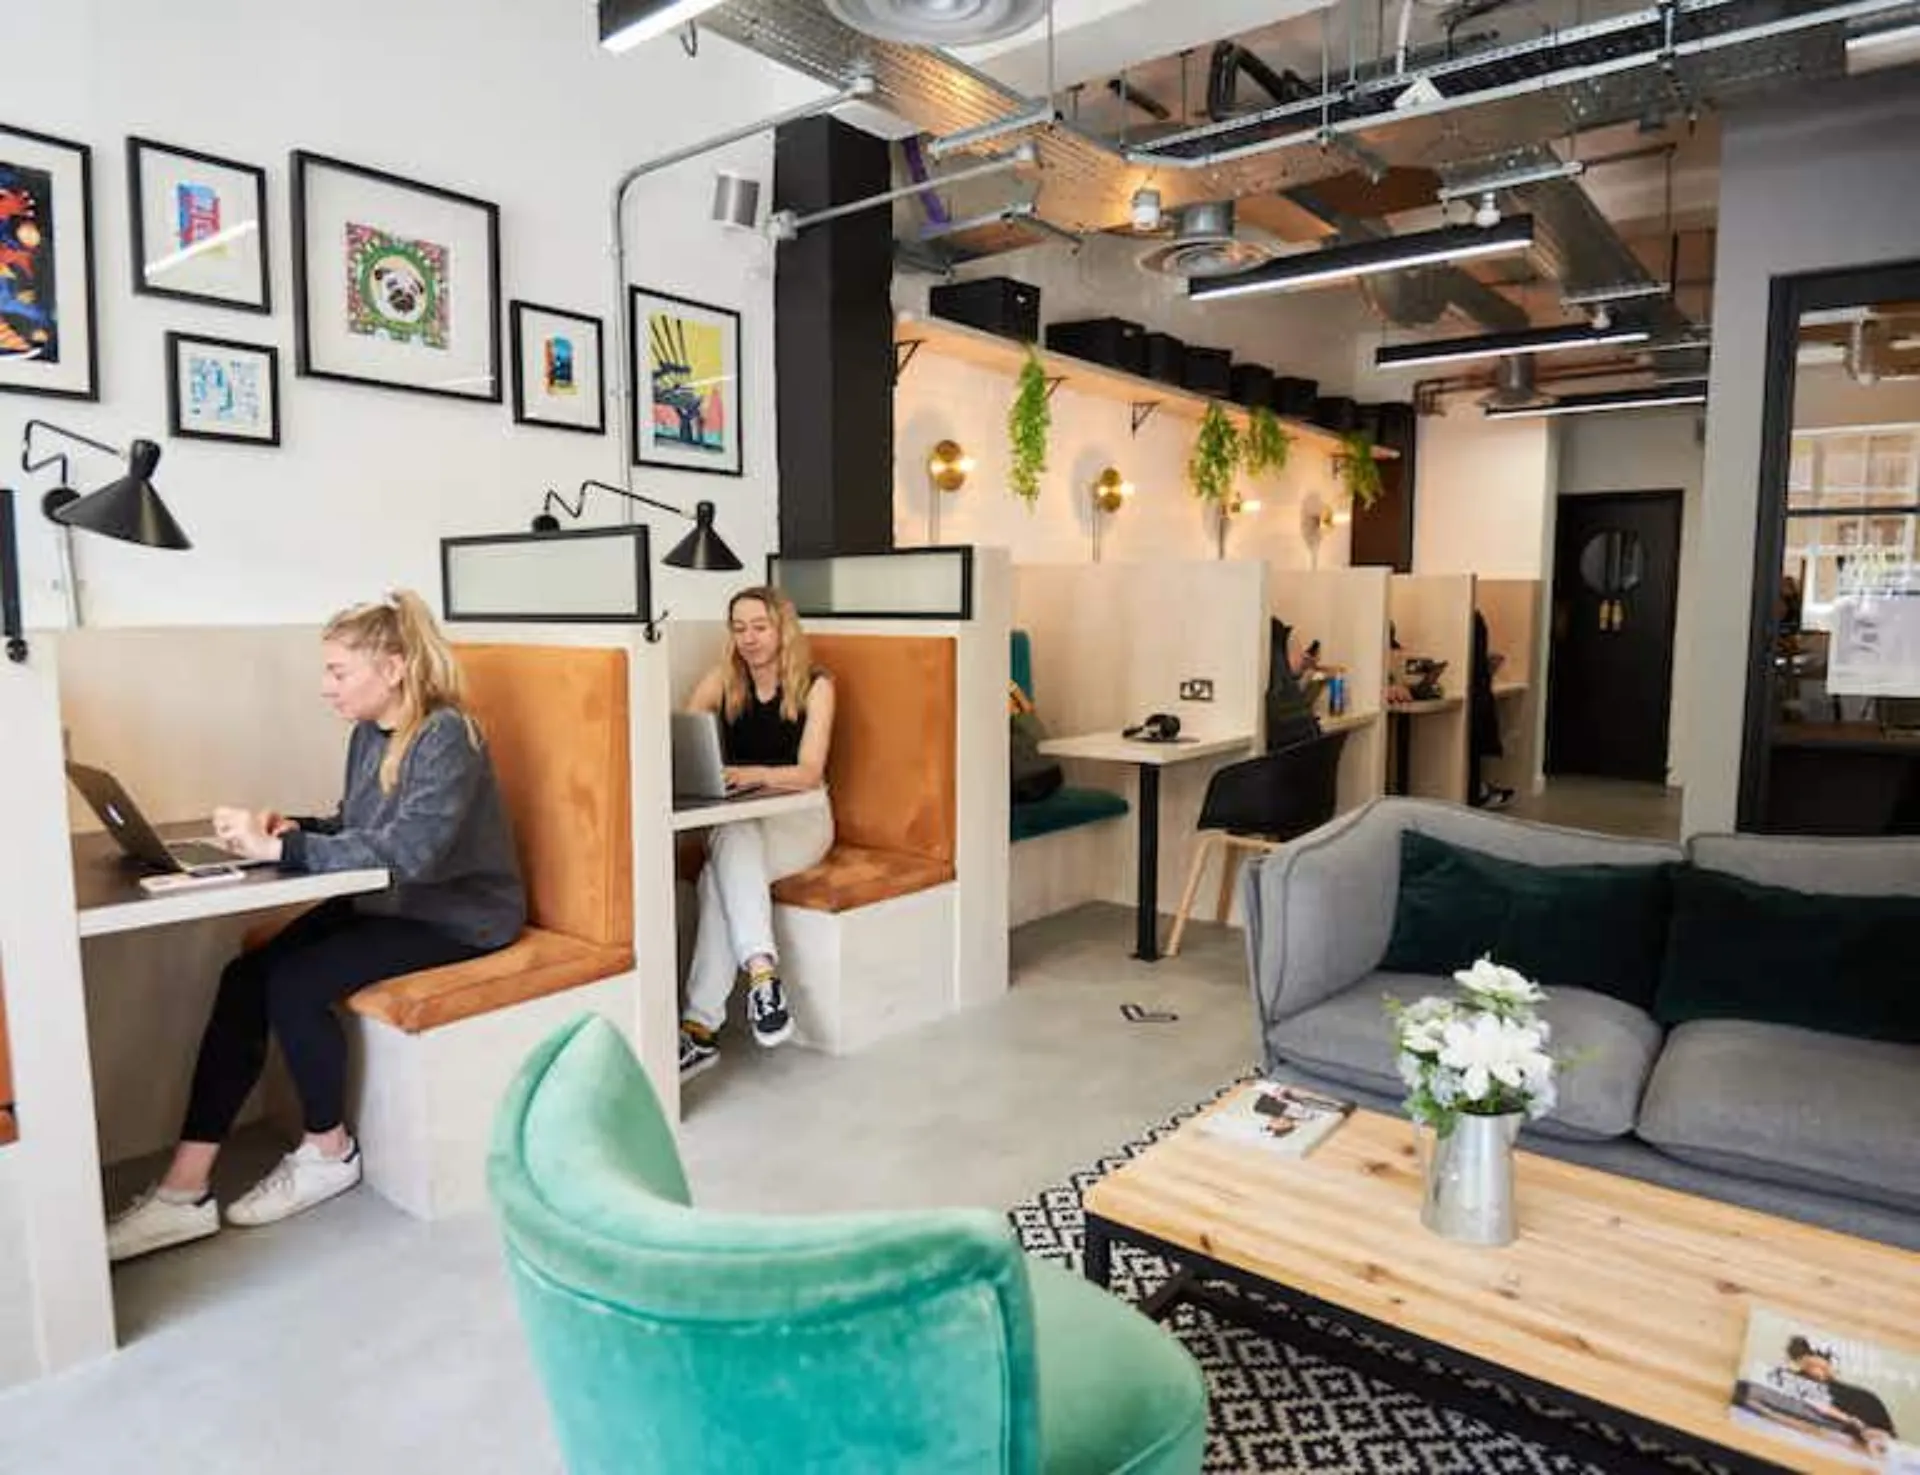 Work.Life Co-working space Desks day pass bookings 